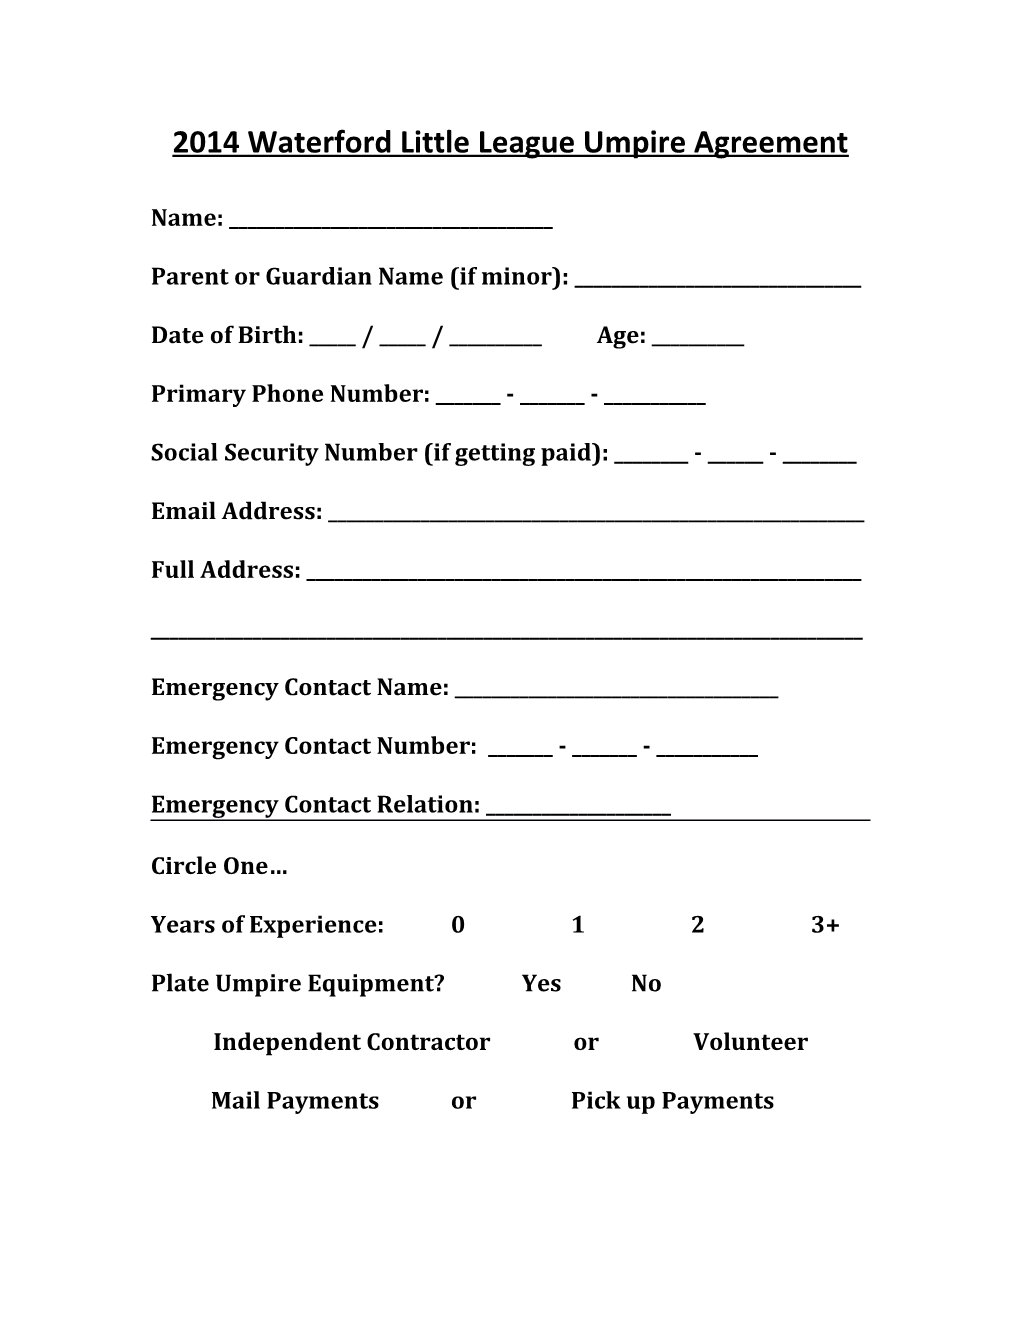 2014 Waterford Little League Umpire Agreement